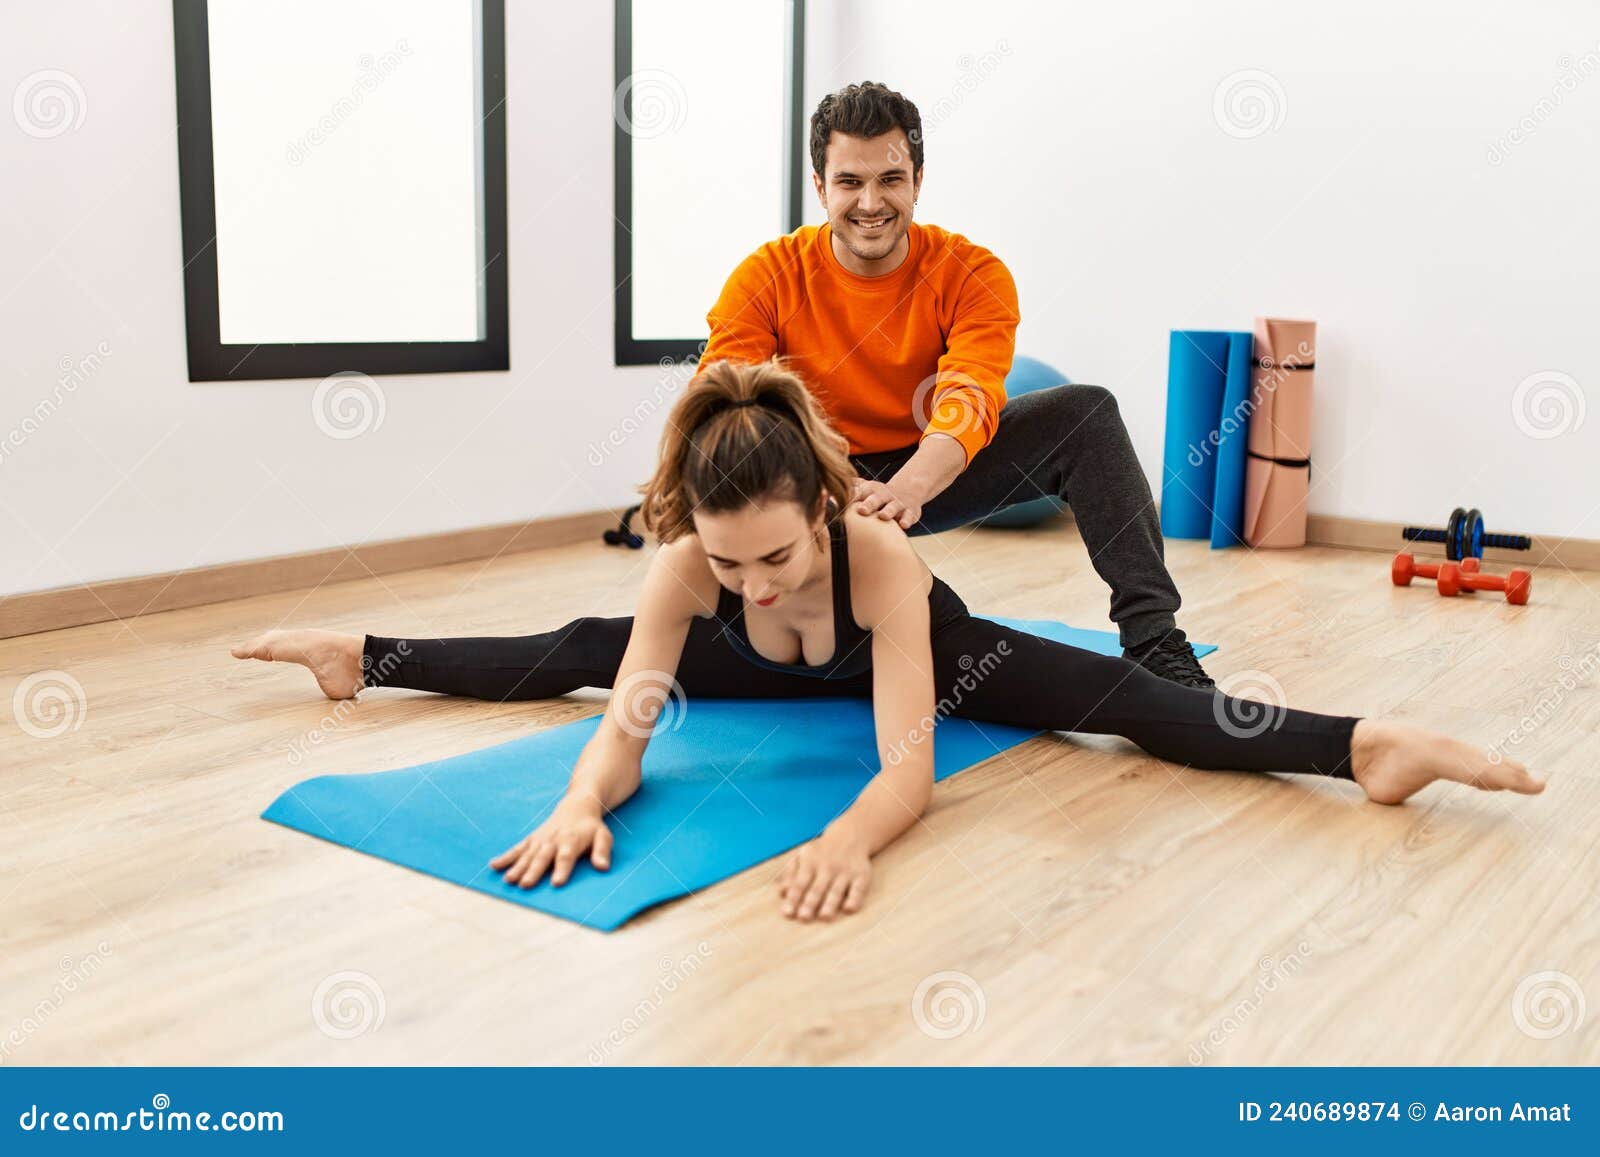 Woman Training with Personal Trainer at Sport Center Stock Photo ...